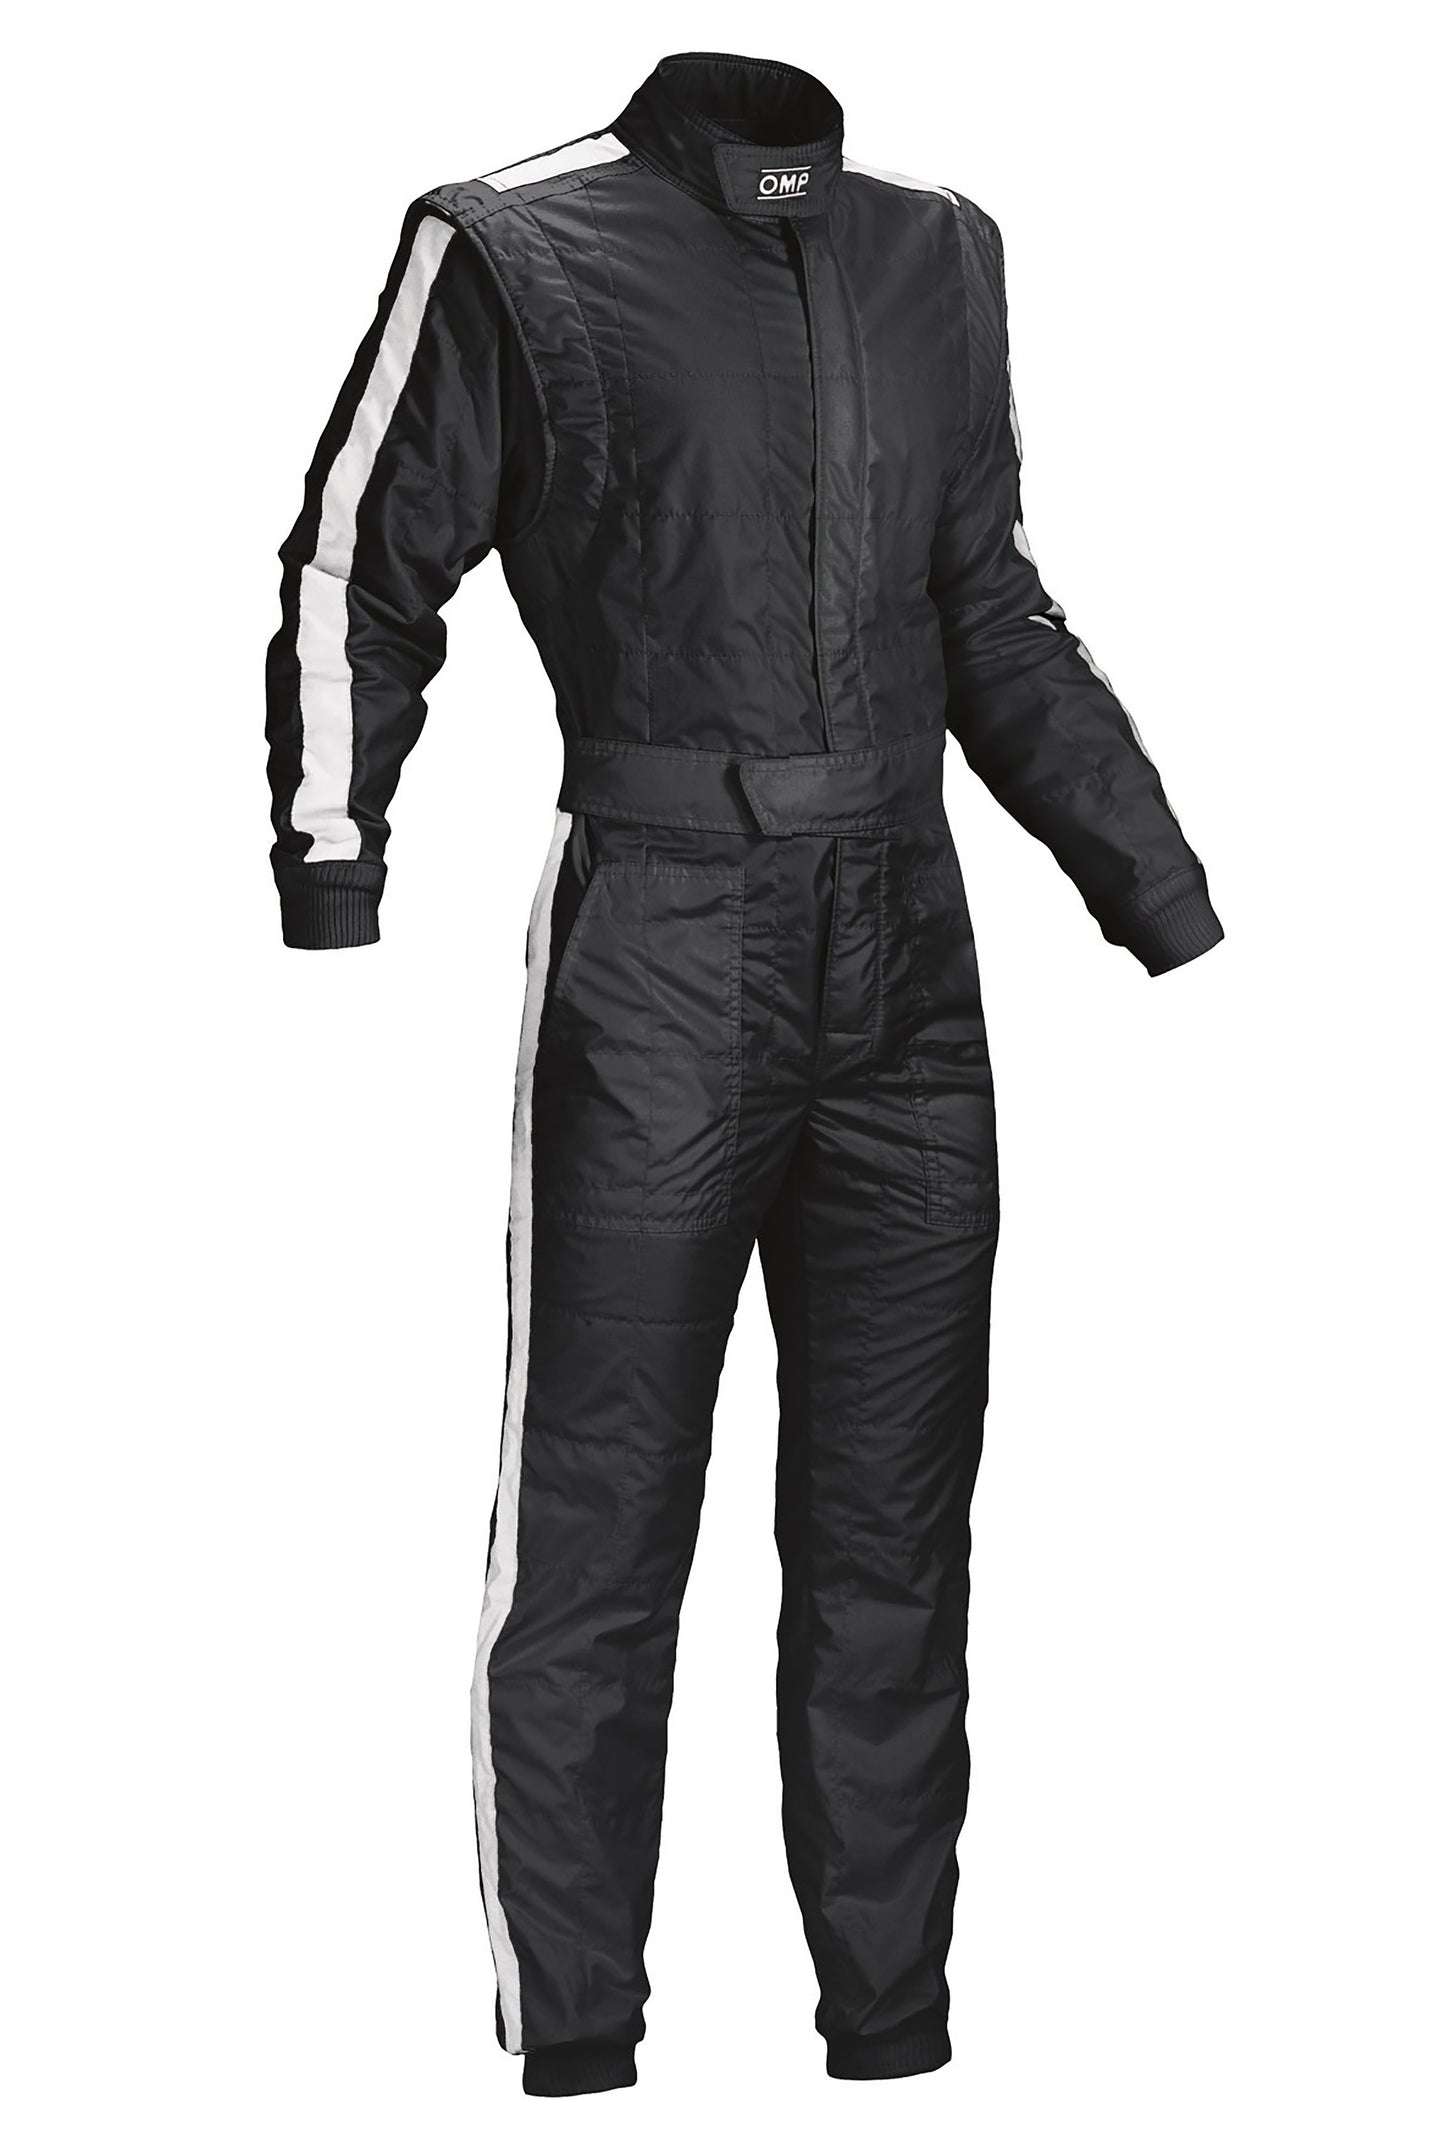 OMP One Vintage Race Suit F1 1960s Style FIA 8856-2018 Fireproof Racing Rally